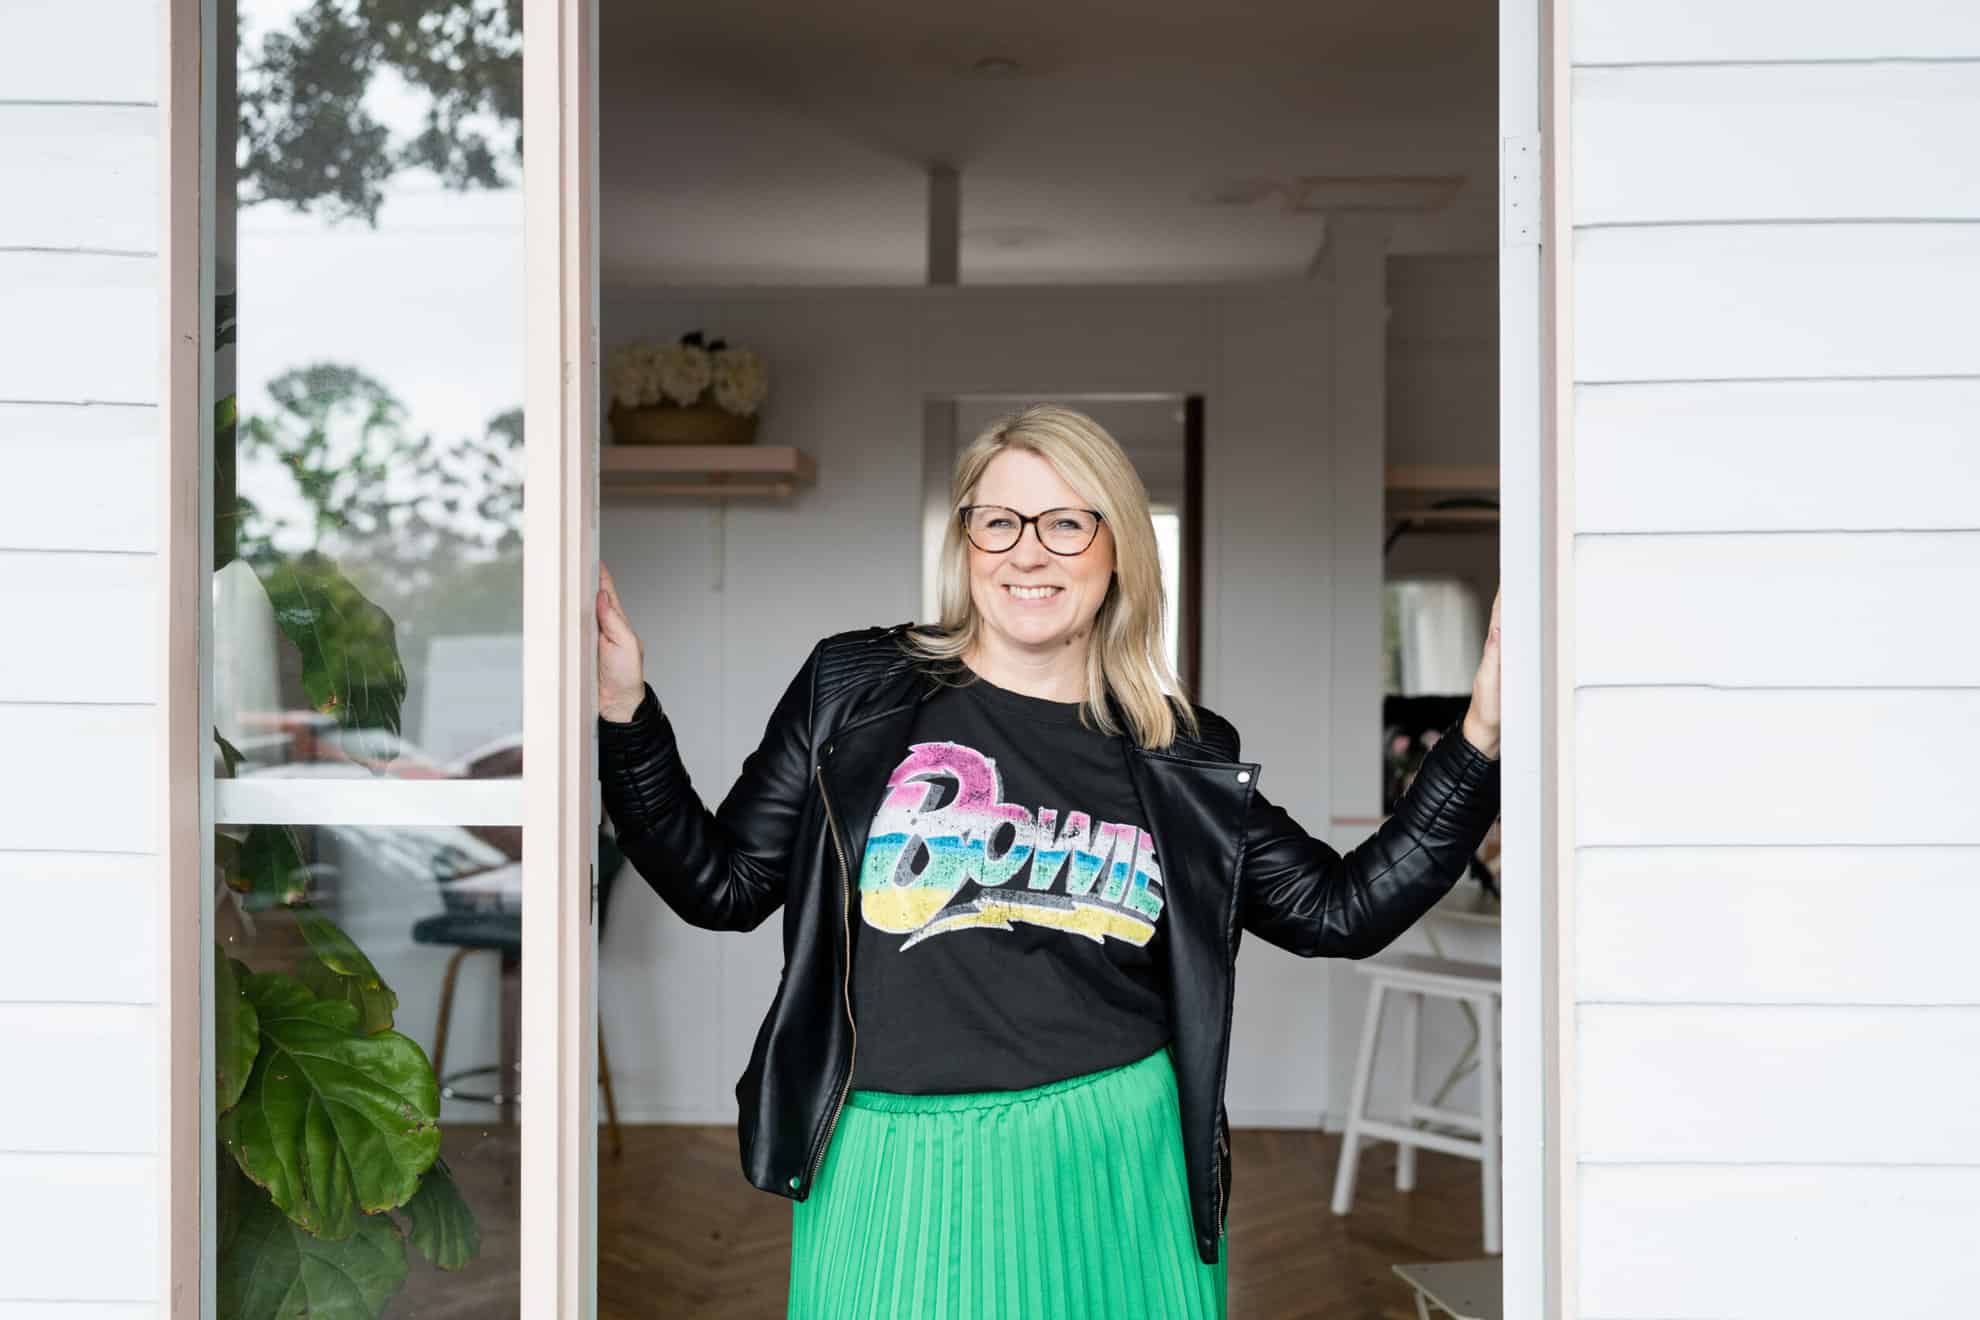 A WordPress designer wearing glasses and a green skirt standing in front of a white house.